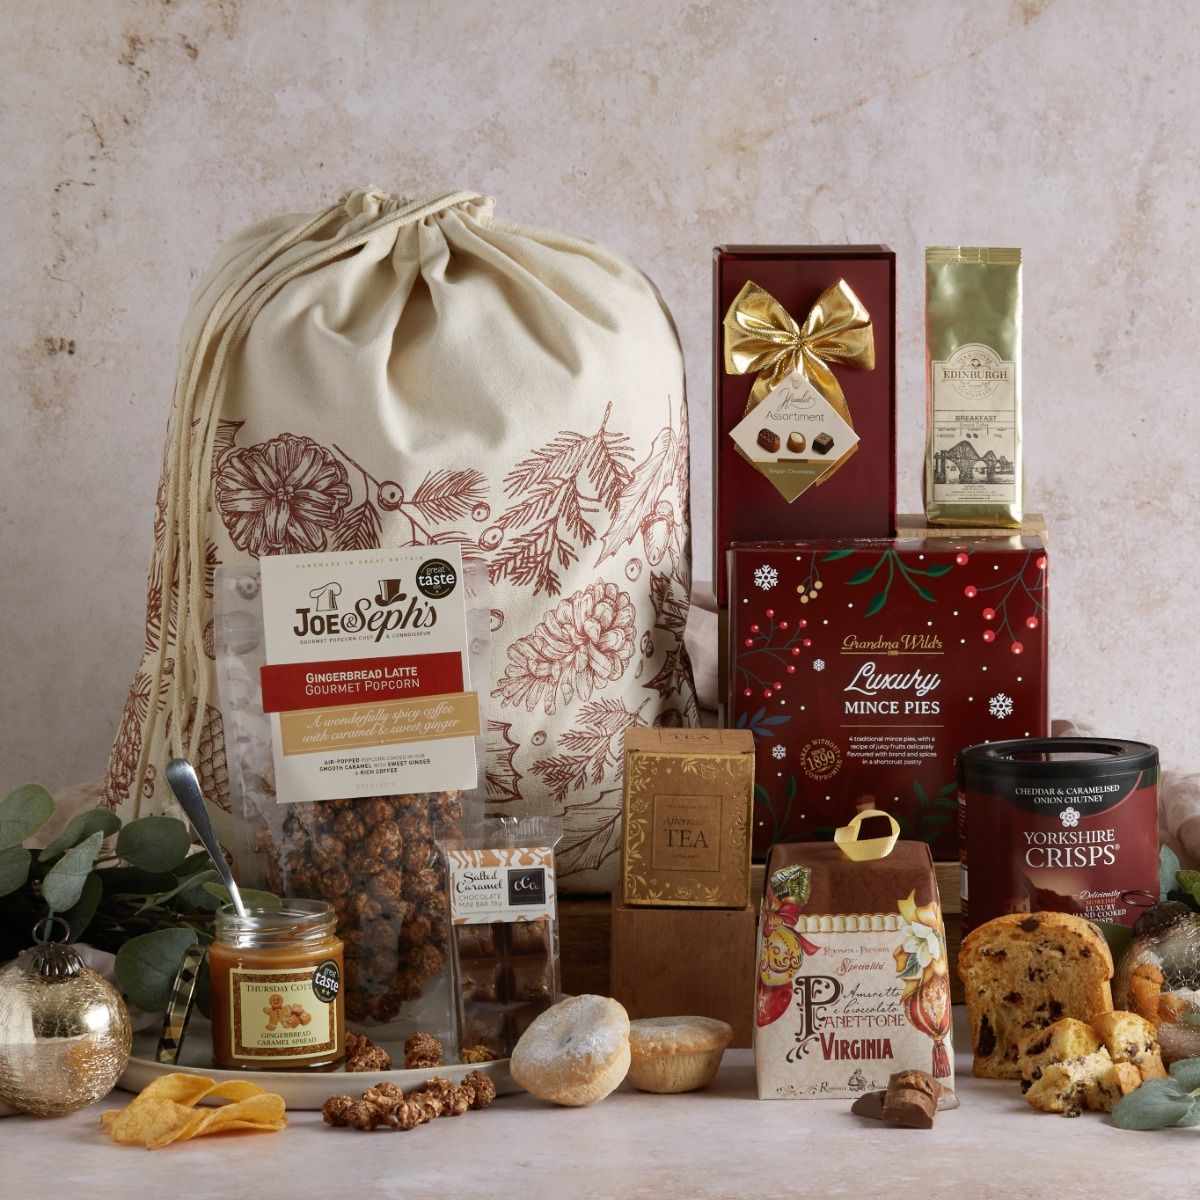 The Festive Favourites Hamper with contents on display and a gold and cream gift bag